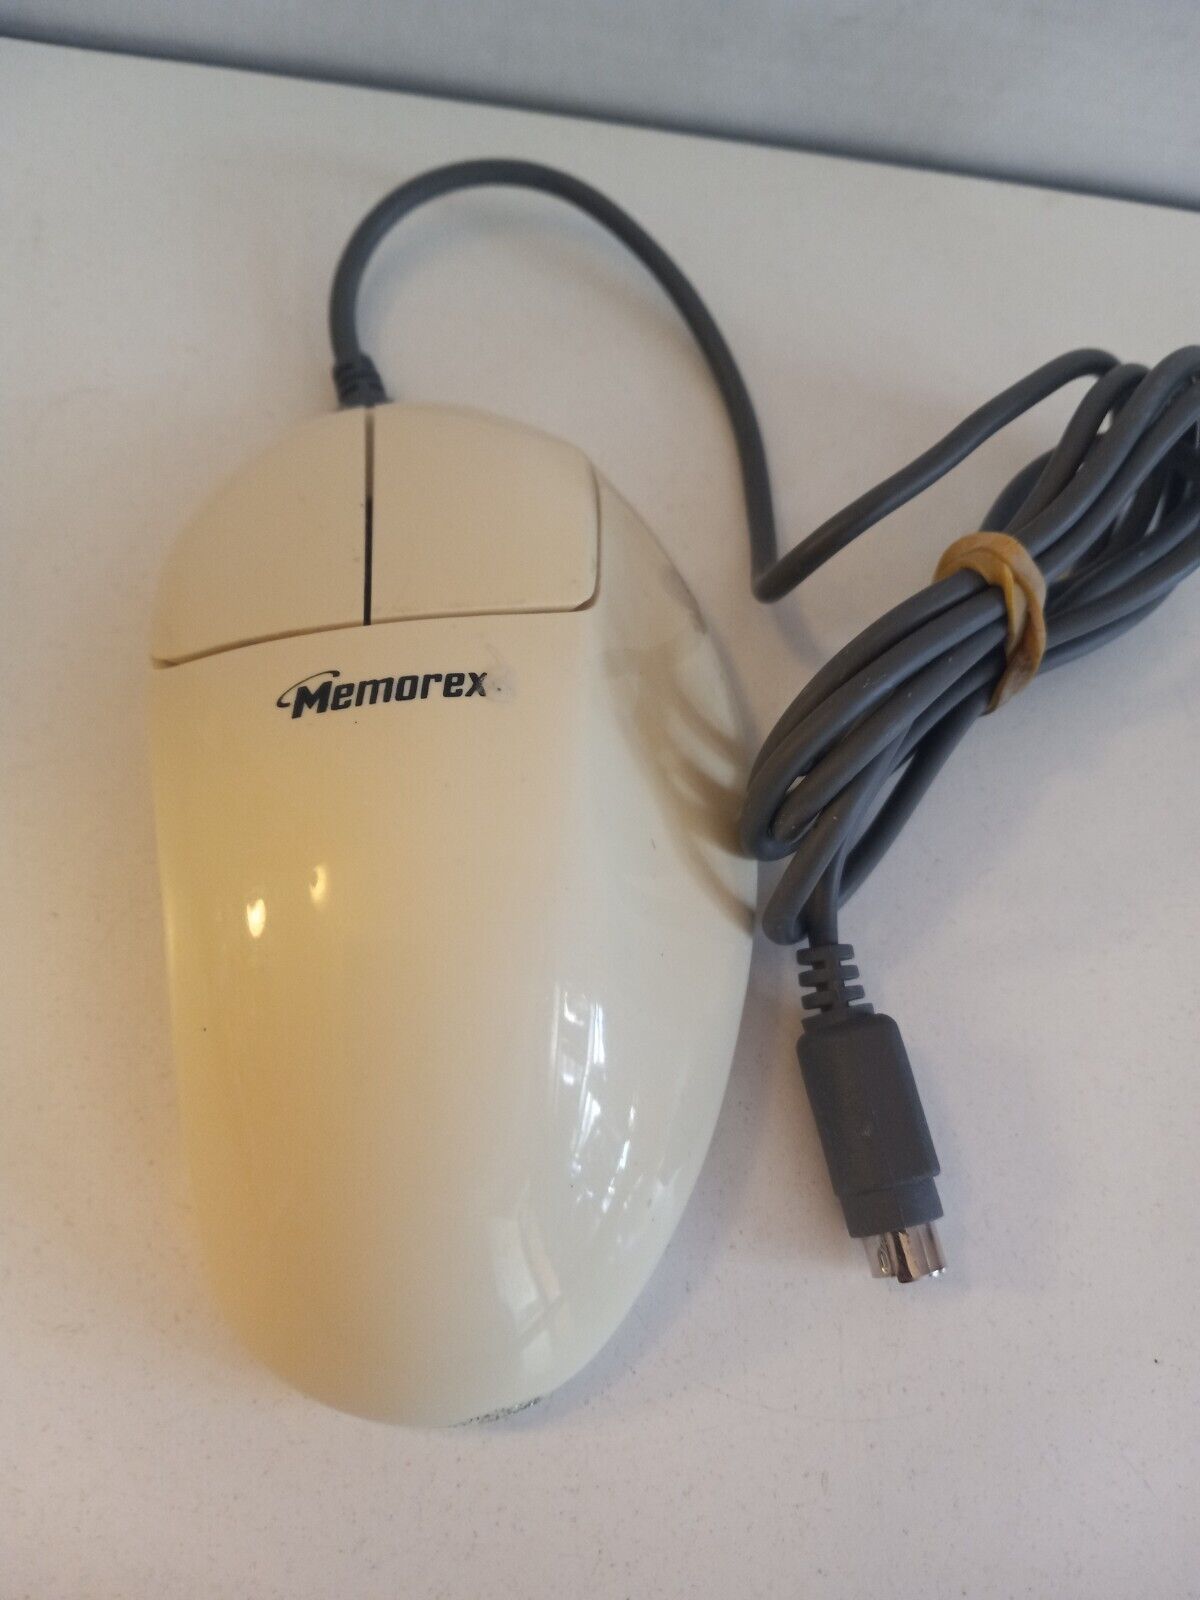 Vintage Memorex 3-Button PM2000 Ball Wired Mouse